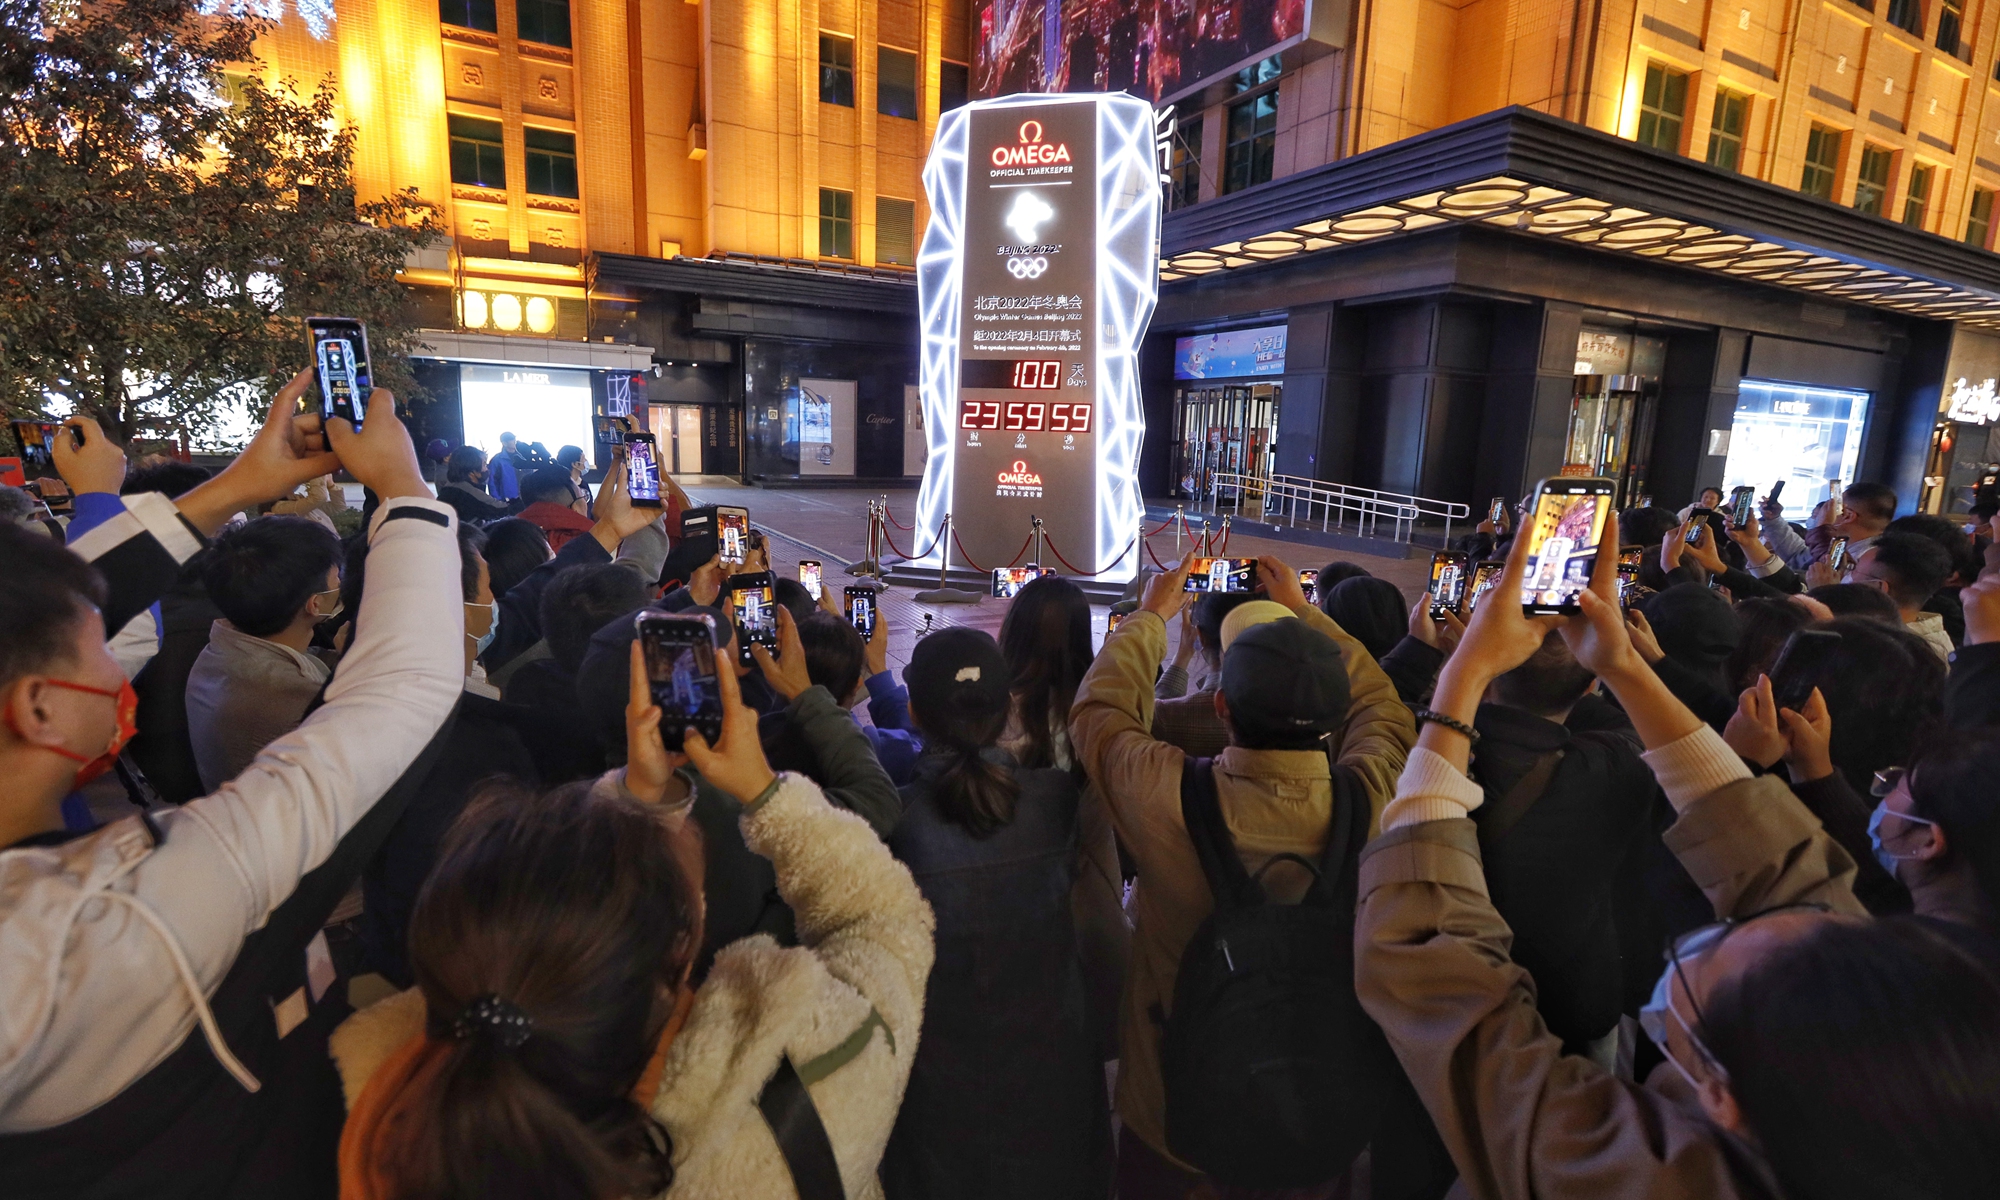 Visitors take pictures in front of the countdown board in downtown Beijing's Wangfujing Pedestrian Street on October 26, 2021, which marks the 100-day countdown to the 2022 Olympic and Paralympic Winter Games. Photo: Li Hao/Global Times